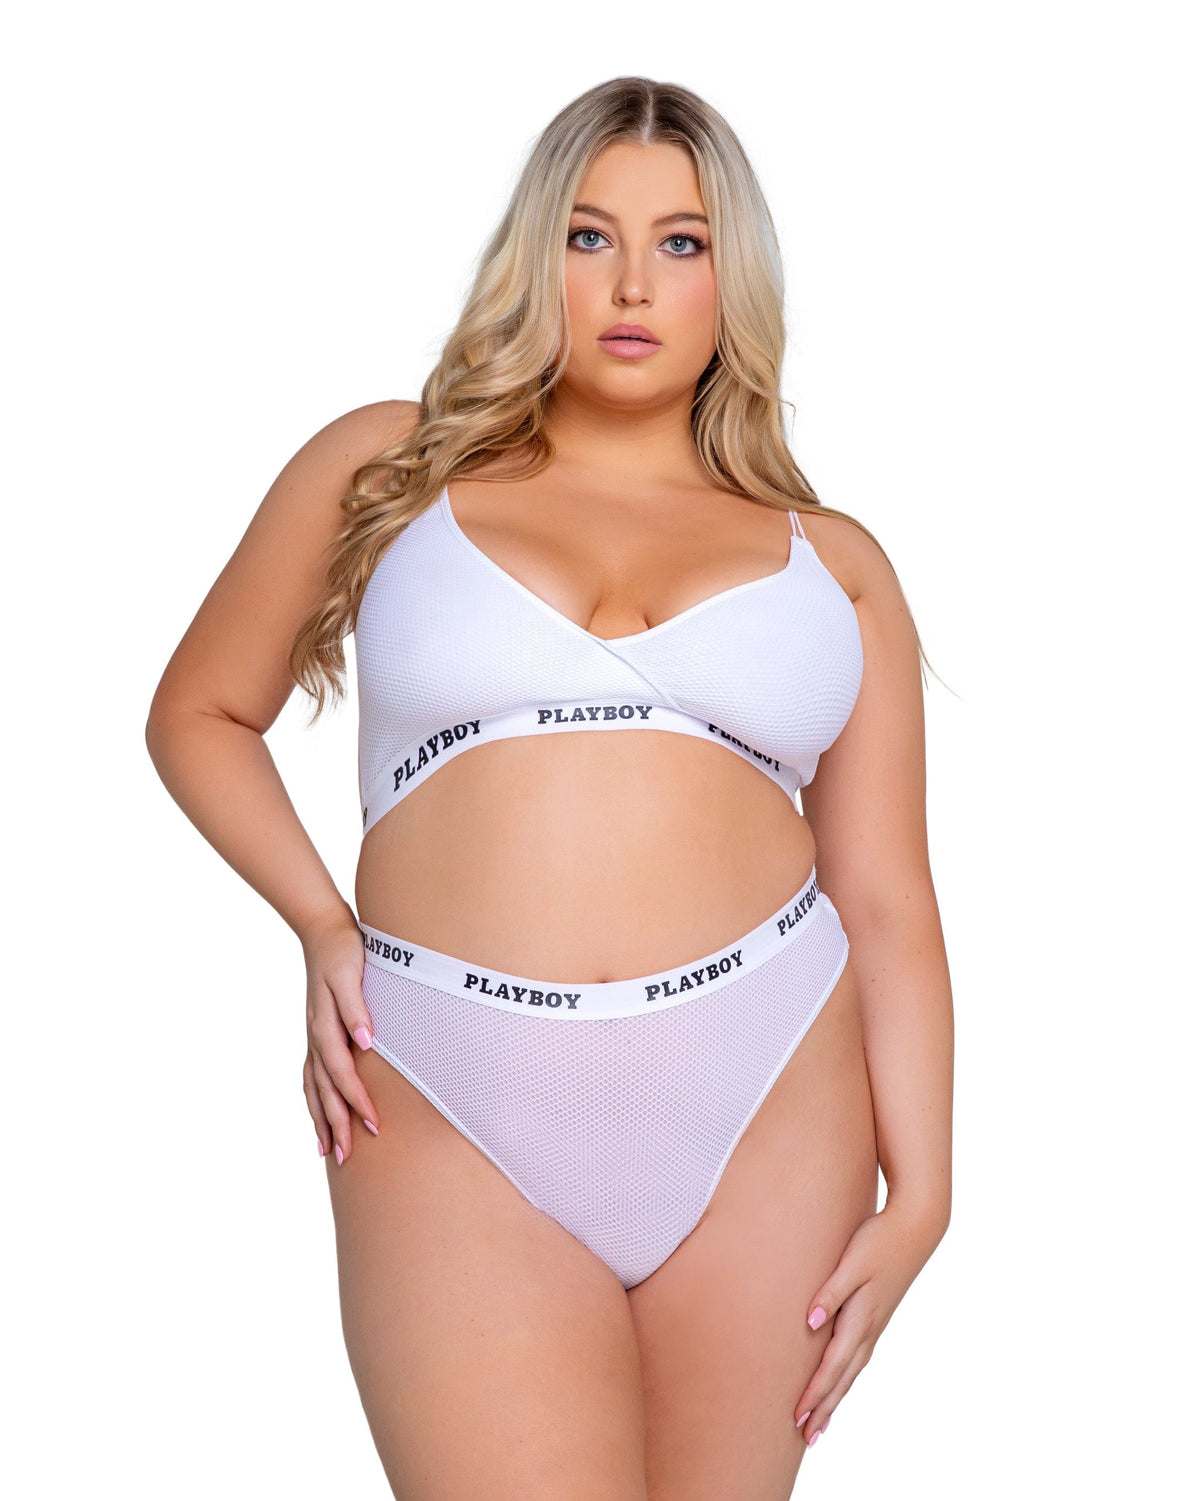 Roma White Mesh Playboy Lifestyle Bralette &amp; High Waisted Thong Set (Plus Size Available) 2024 White Mesh Playboy Lifestyle Bralette Thong Lingerie  Apparel &amp; Accessories &gt; Clothing &gt; Underwear &amp; Socks &gt; Lingerie